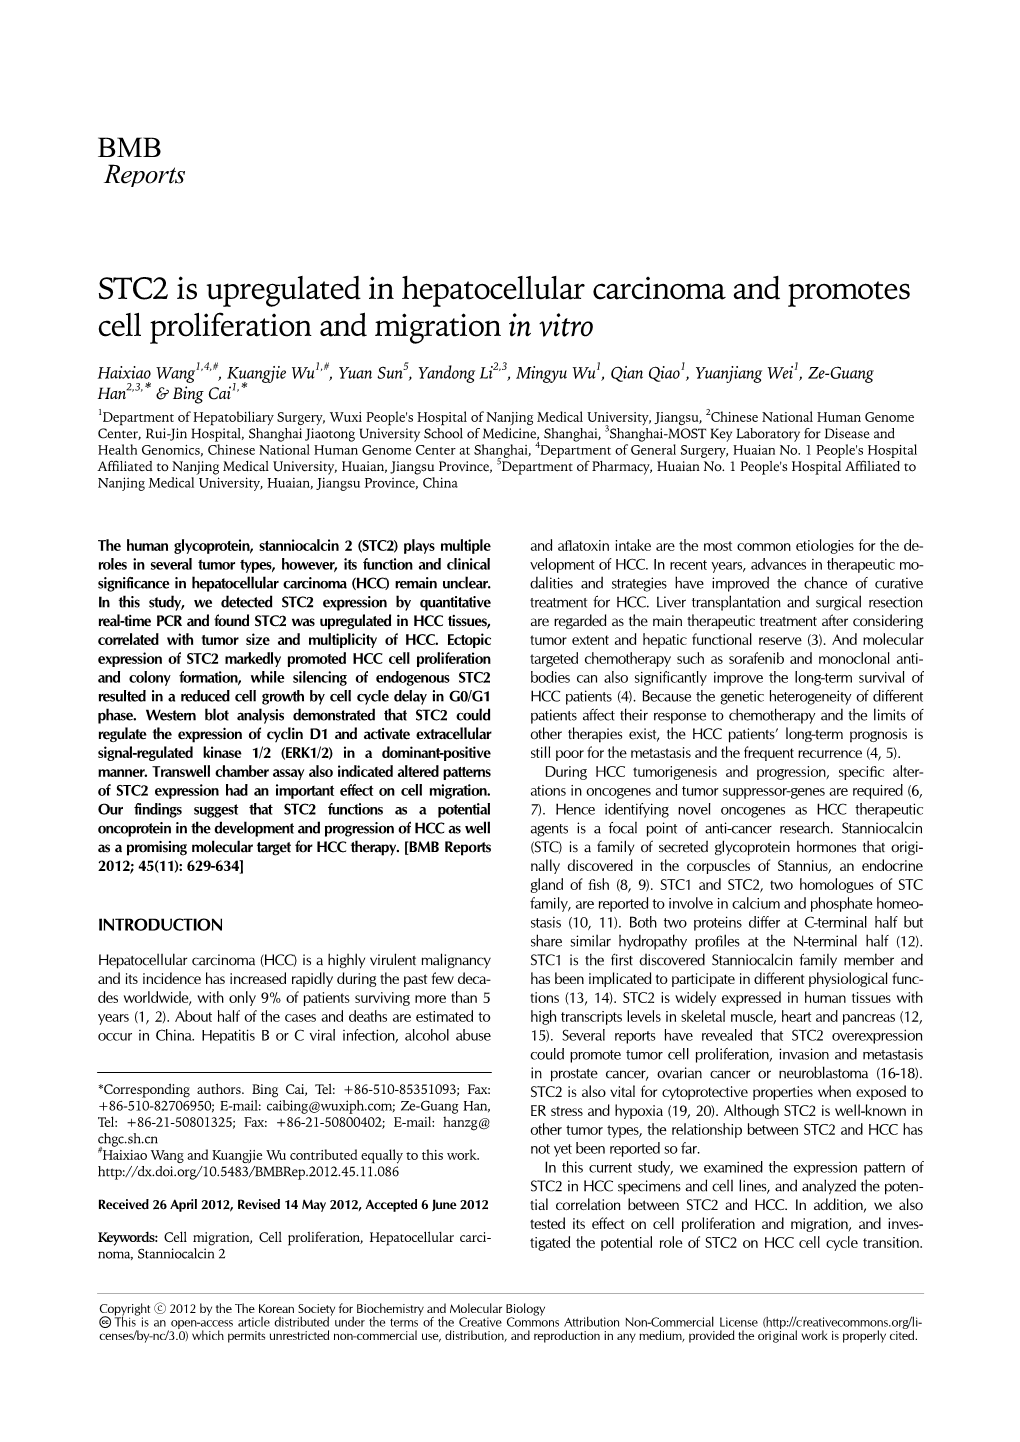 STC2 Is Upregulated in Hepatocellular Carcinoma and Promotes Cell Proliferation and Migration in Vitro